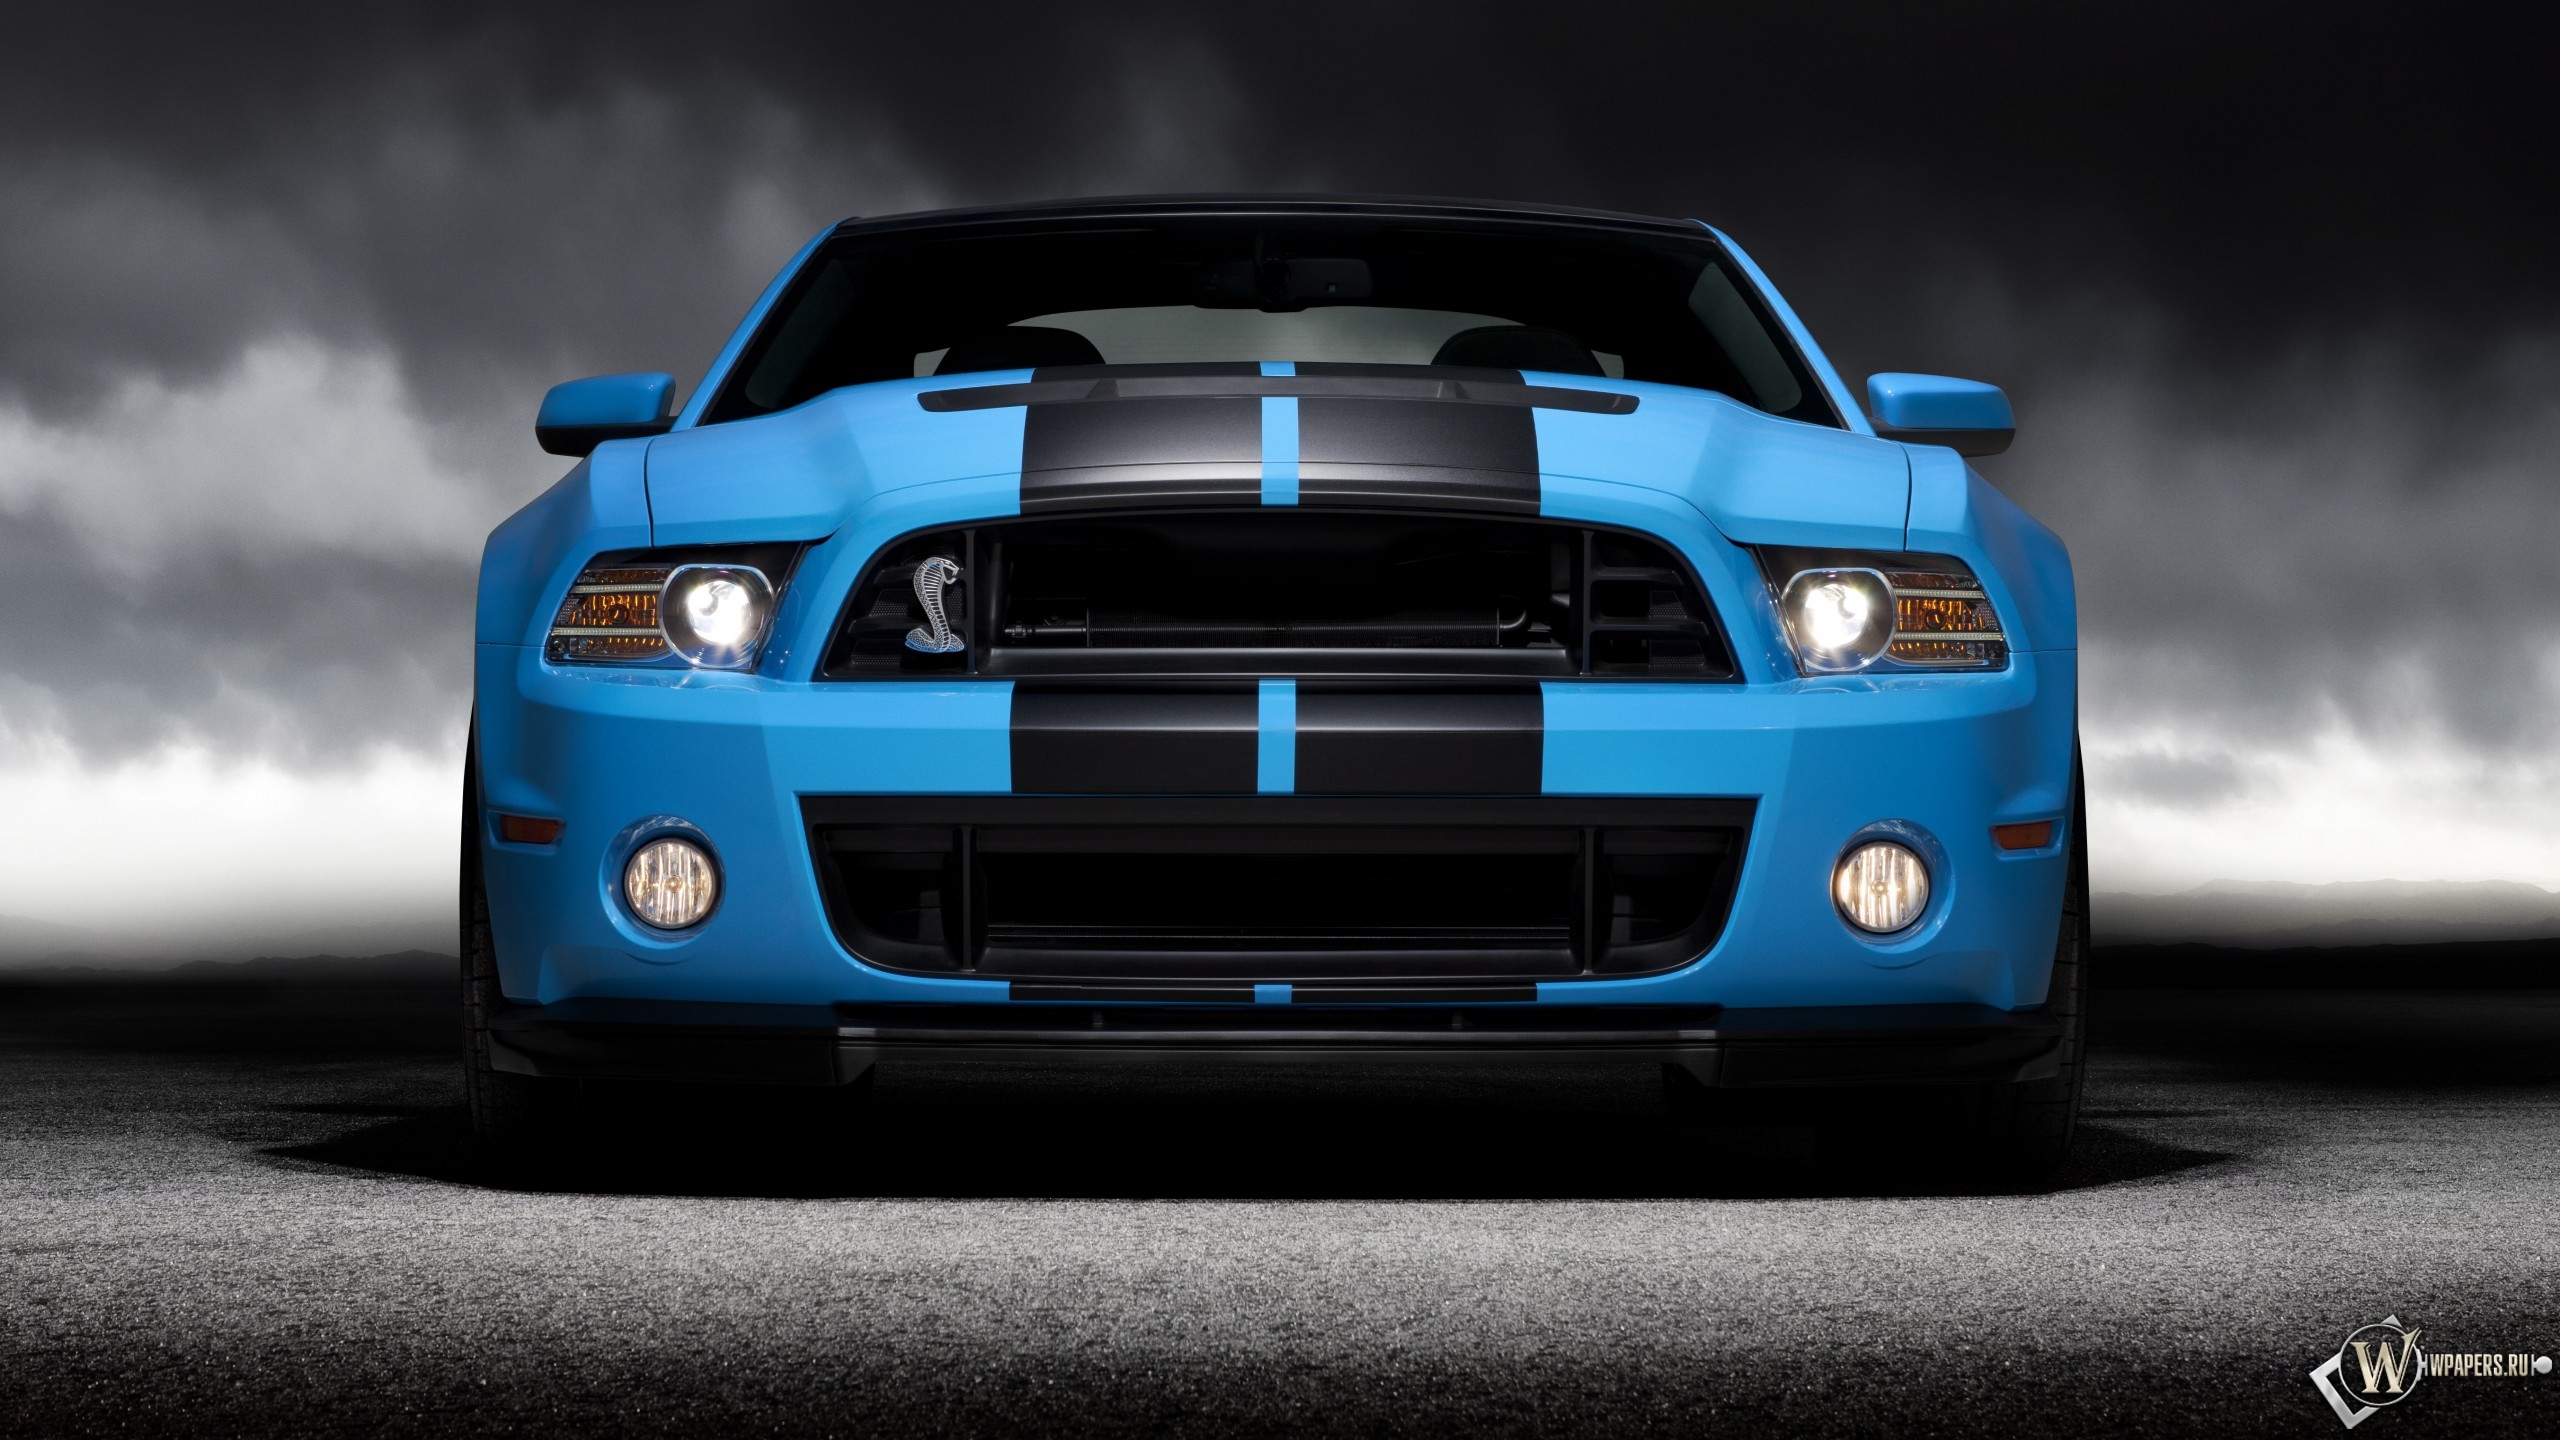 2013 Ford Mustang Shelby GT500 2560x1440